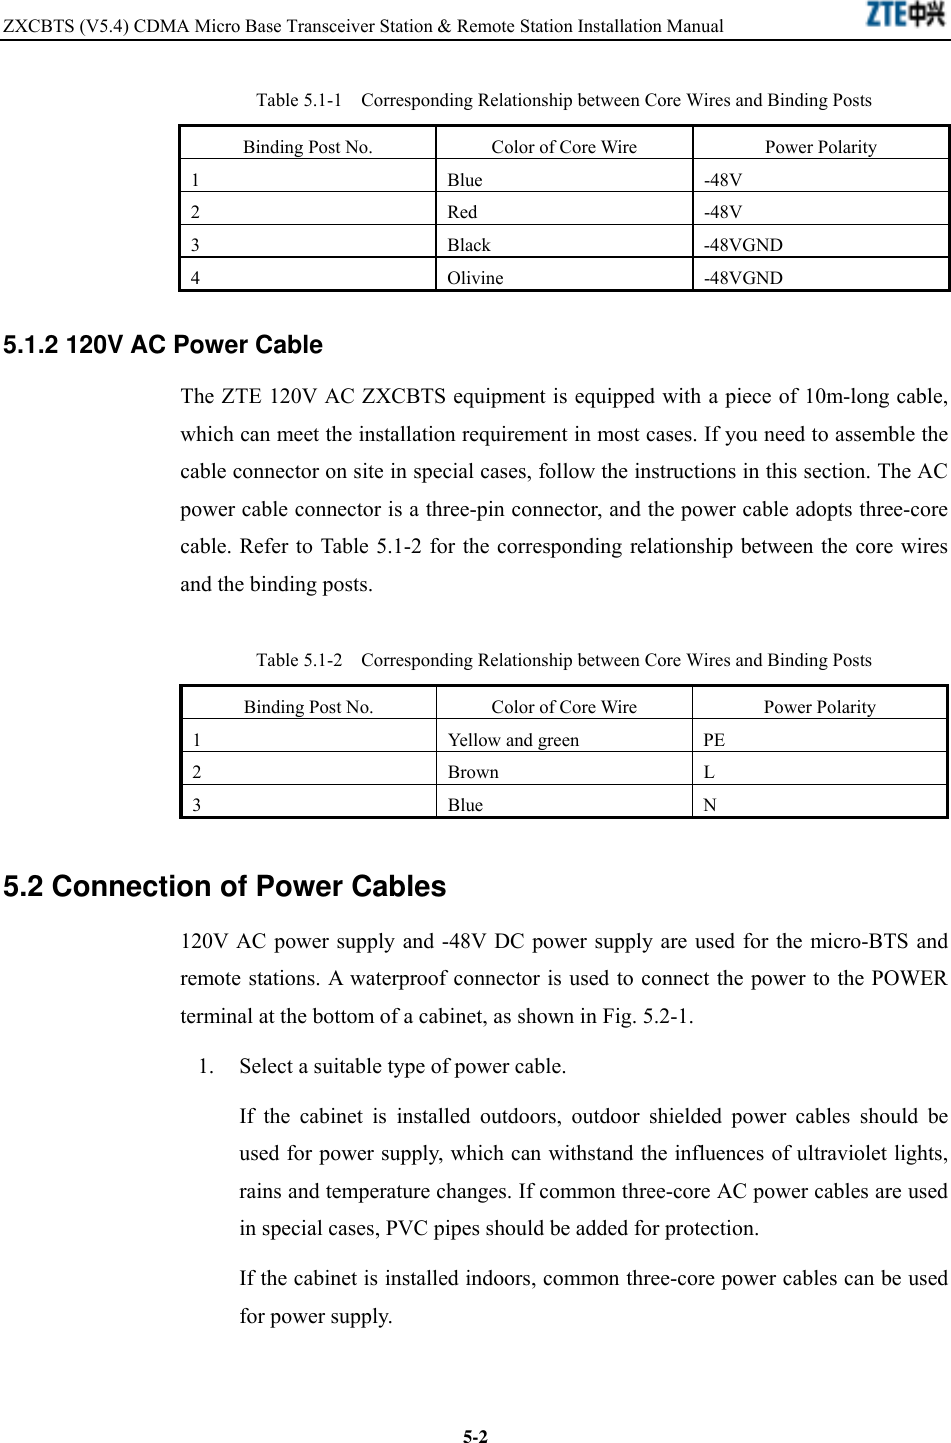 ZXCBTS (V5.4) CDMA Micro Base Transceiver Station &amp; Remote Station Installation Manual    5-2Table 5.1-1  Corresponding Relationship between Core Wires and Binding Posts Binding Post No.  Color of Core Wire  Power Polarity 1 Blue -48V 2 Red -48V 3 Black -48VGND 4 Olivine -48VGND 5.1.2 120V AC Power Cable The ZTE 120V AC ZXCBTS equipment is equipped with a piece of 10m-long cable, which can meet the installation requirement in most cases. If you need to assemble the cable connector on site in special cases, follow the instructions in this section. The AC power cable connector is a three-pin connector, and the power cable adopts three-core cable. Refer to Table 5.1-2 for the corresponding relationship between the core wires and the binding posts. Table 5.1-2  Corresponding Relationship between Core Wires and Binding Posts Binding Post No.  Color of Core Wire  Power Polarity 1  Yellow and green  PE 2 Brown L 3 Blue N 5.2 Connection of Power Cables 120V AC power supply and -48V DC power supply are used for the micro-BTS and remote stations. A waterproof connector is used to connect the power to the POWER terminal at the bottom of a cabinet, as shown in Fig. 5.2-1. 1.  Select a suitable type of power cable. If the cabinet is installed outdoors, outdoor shielded power cables should be used for power supply, which can withstand the influences of ultraviolet lights, rains and temperature changes. If common three-core AC power cables are used in special cases, PVC pipes should be added for protection. If the cabinet is installed indoors, common three-core power cables can be used for power supply. 